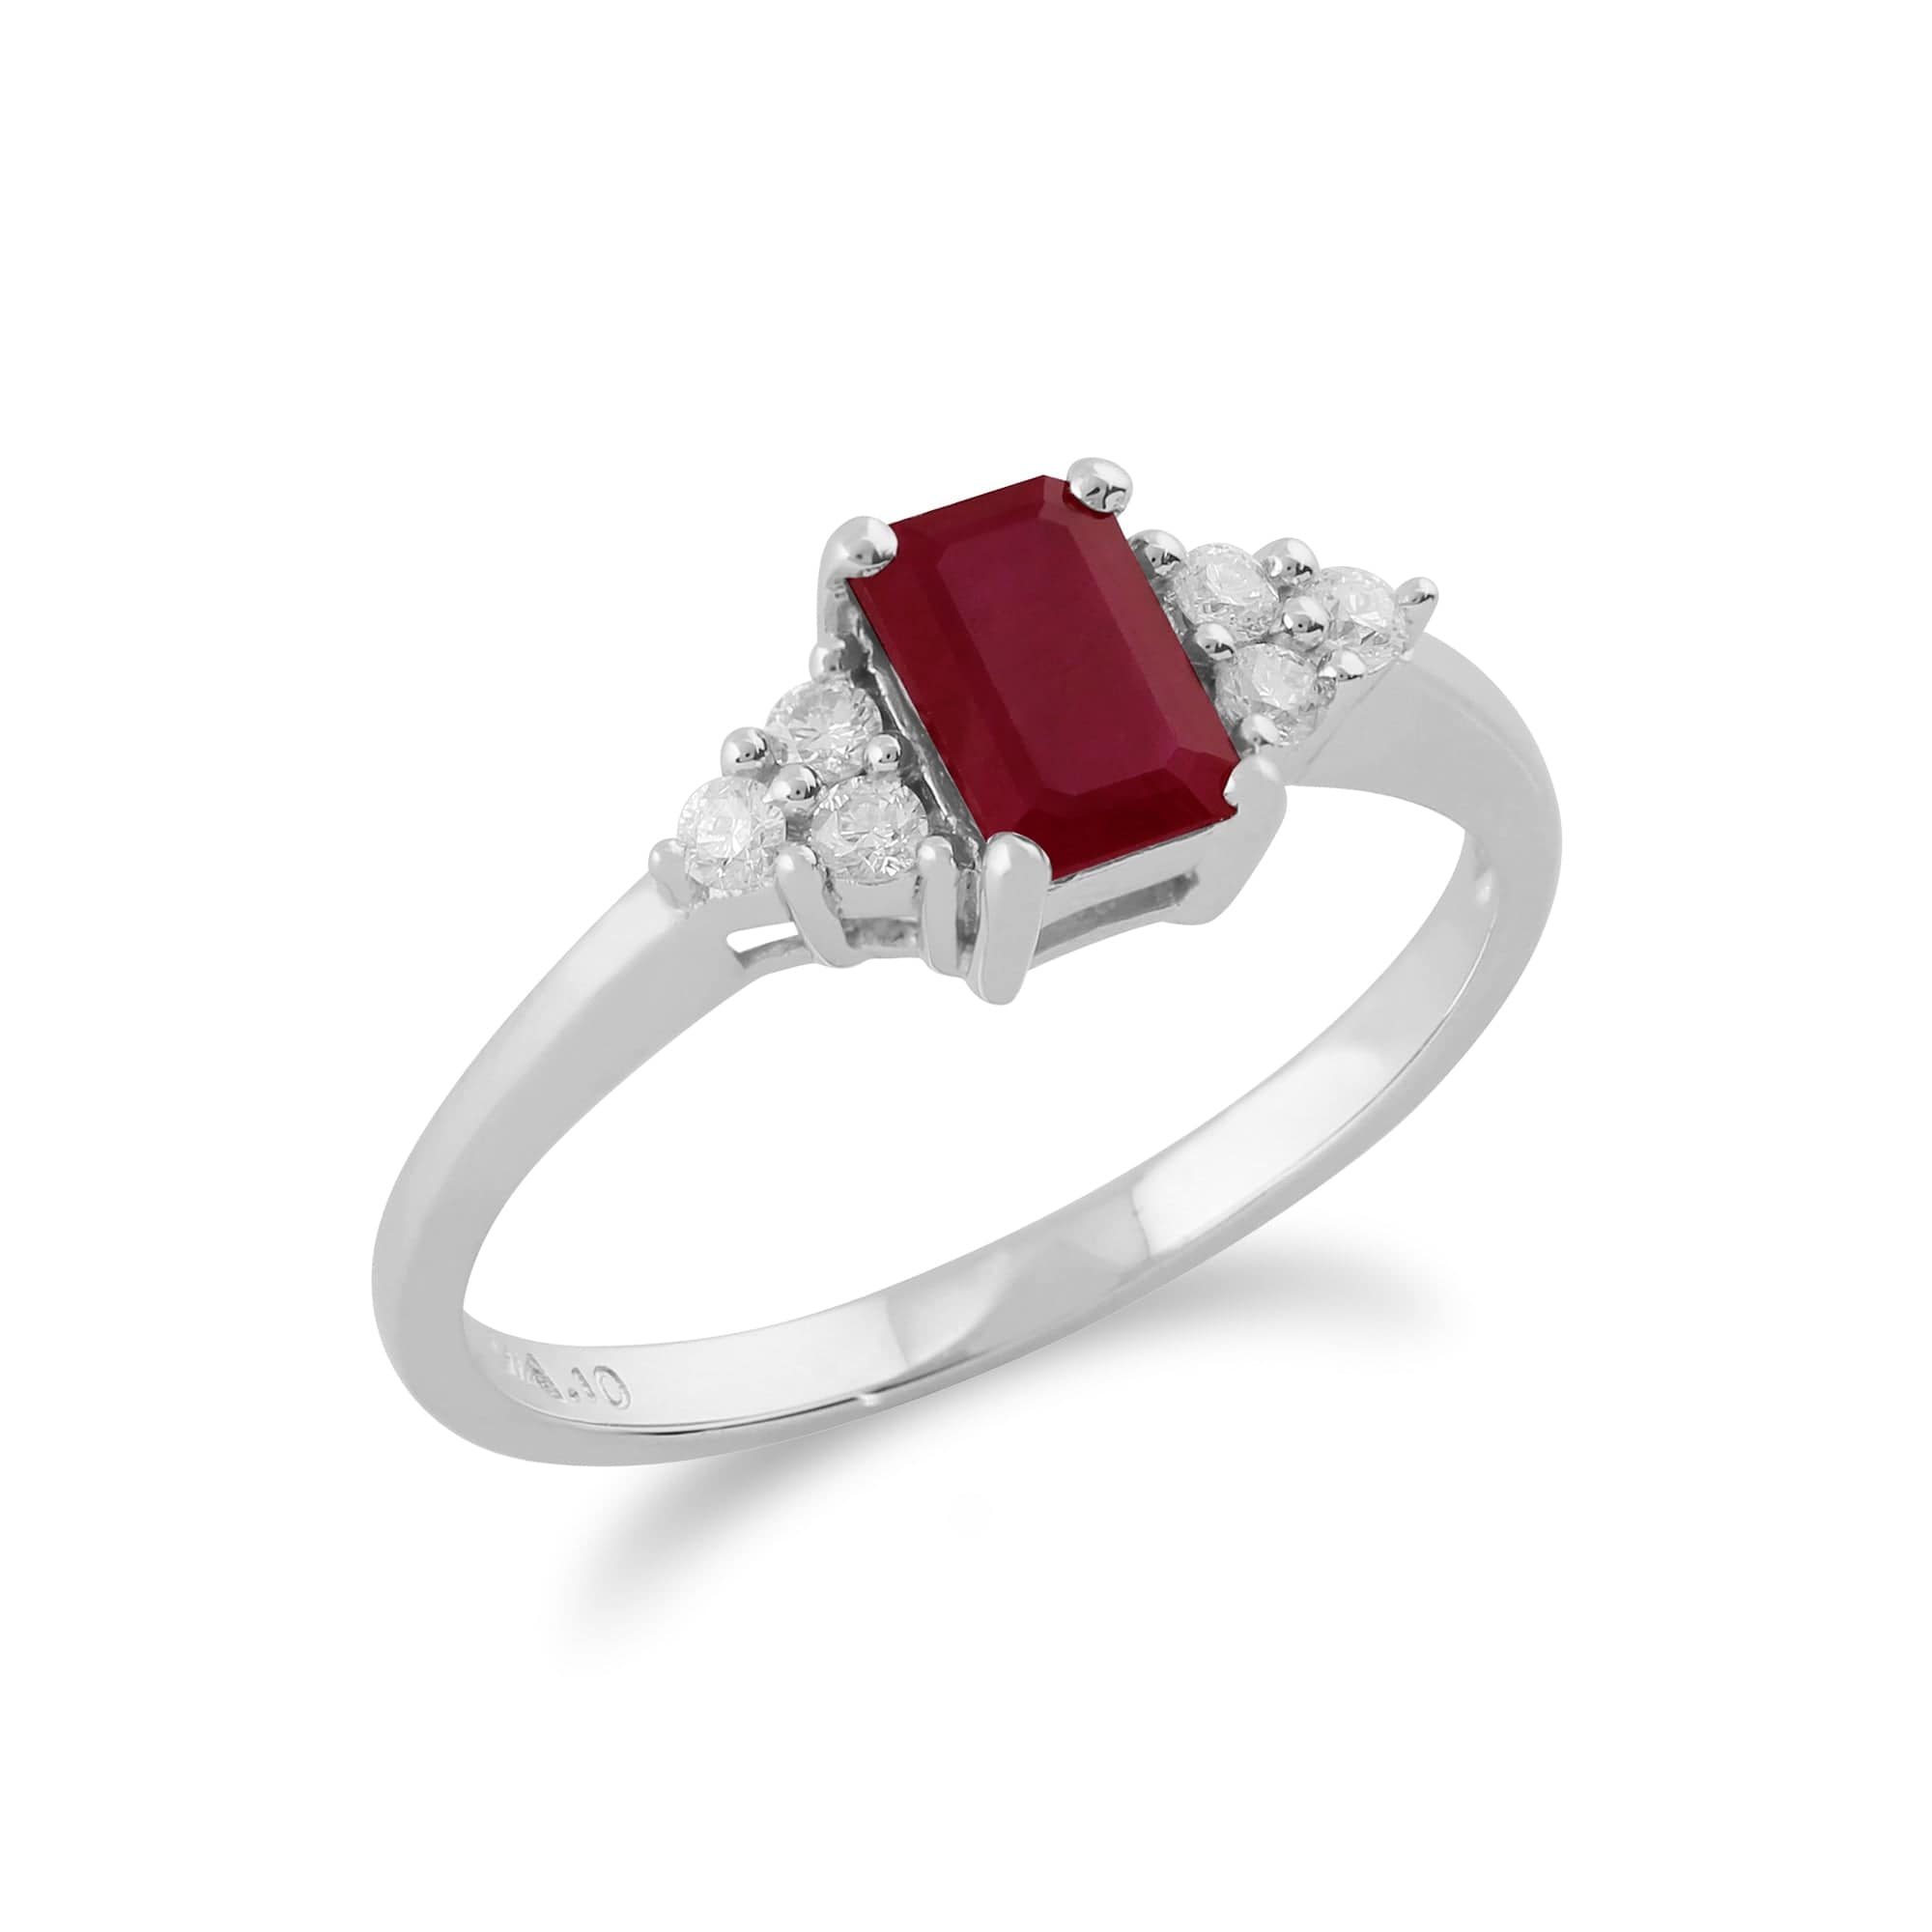 27012 Classic Baguette Ruby & Diamond Ring in 9ct White Gold 2